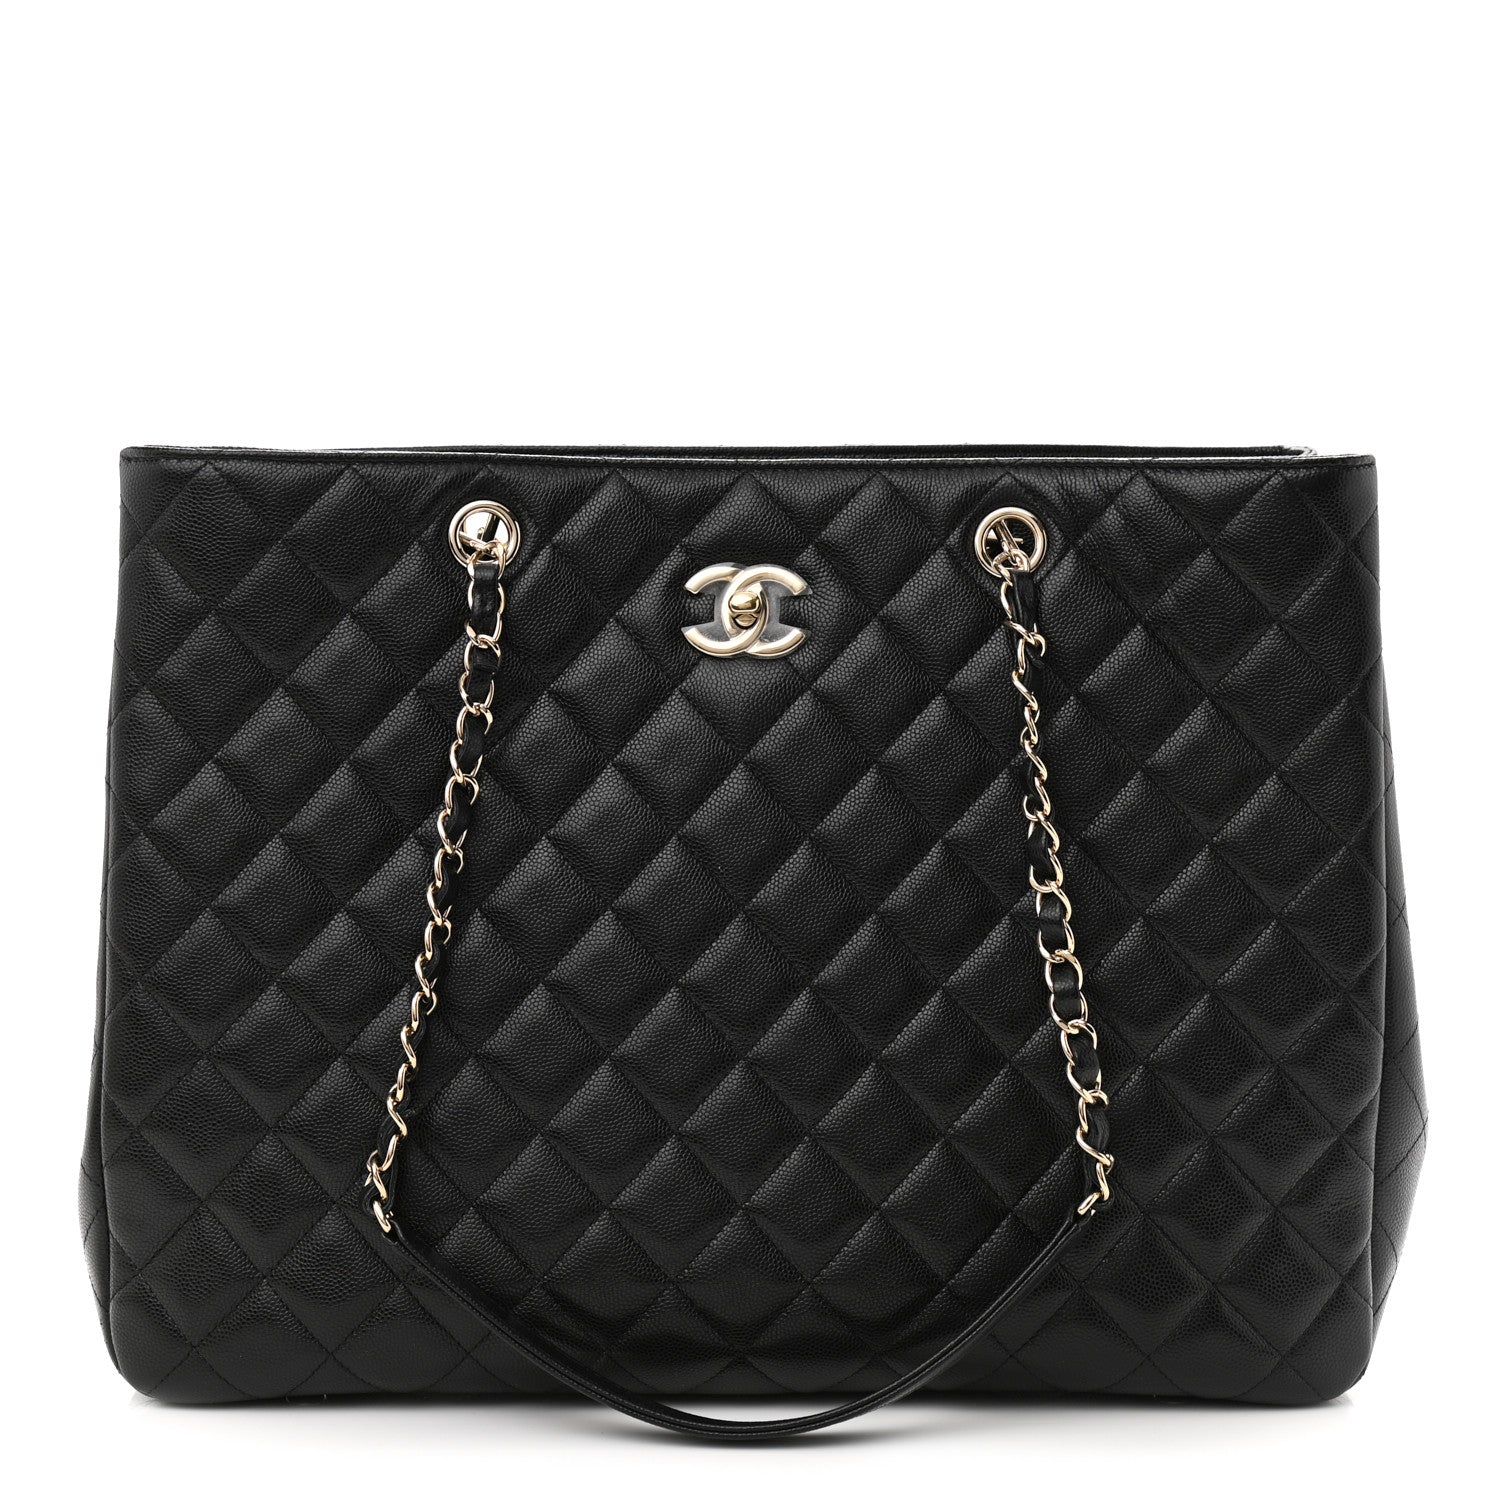 CHANEL, Bags, Chanel Large Shopping Bag